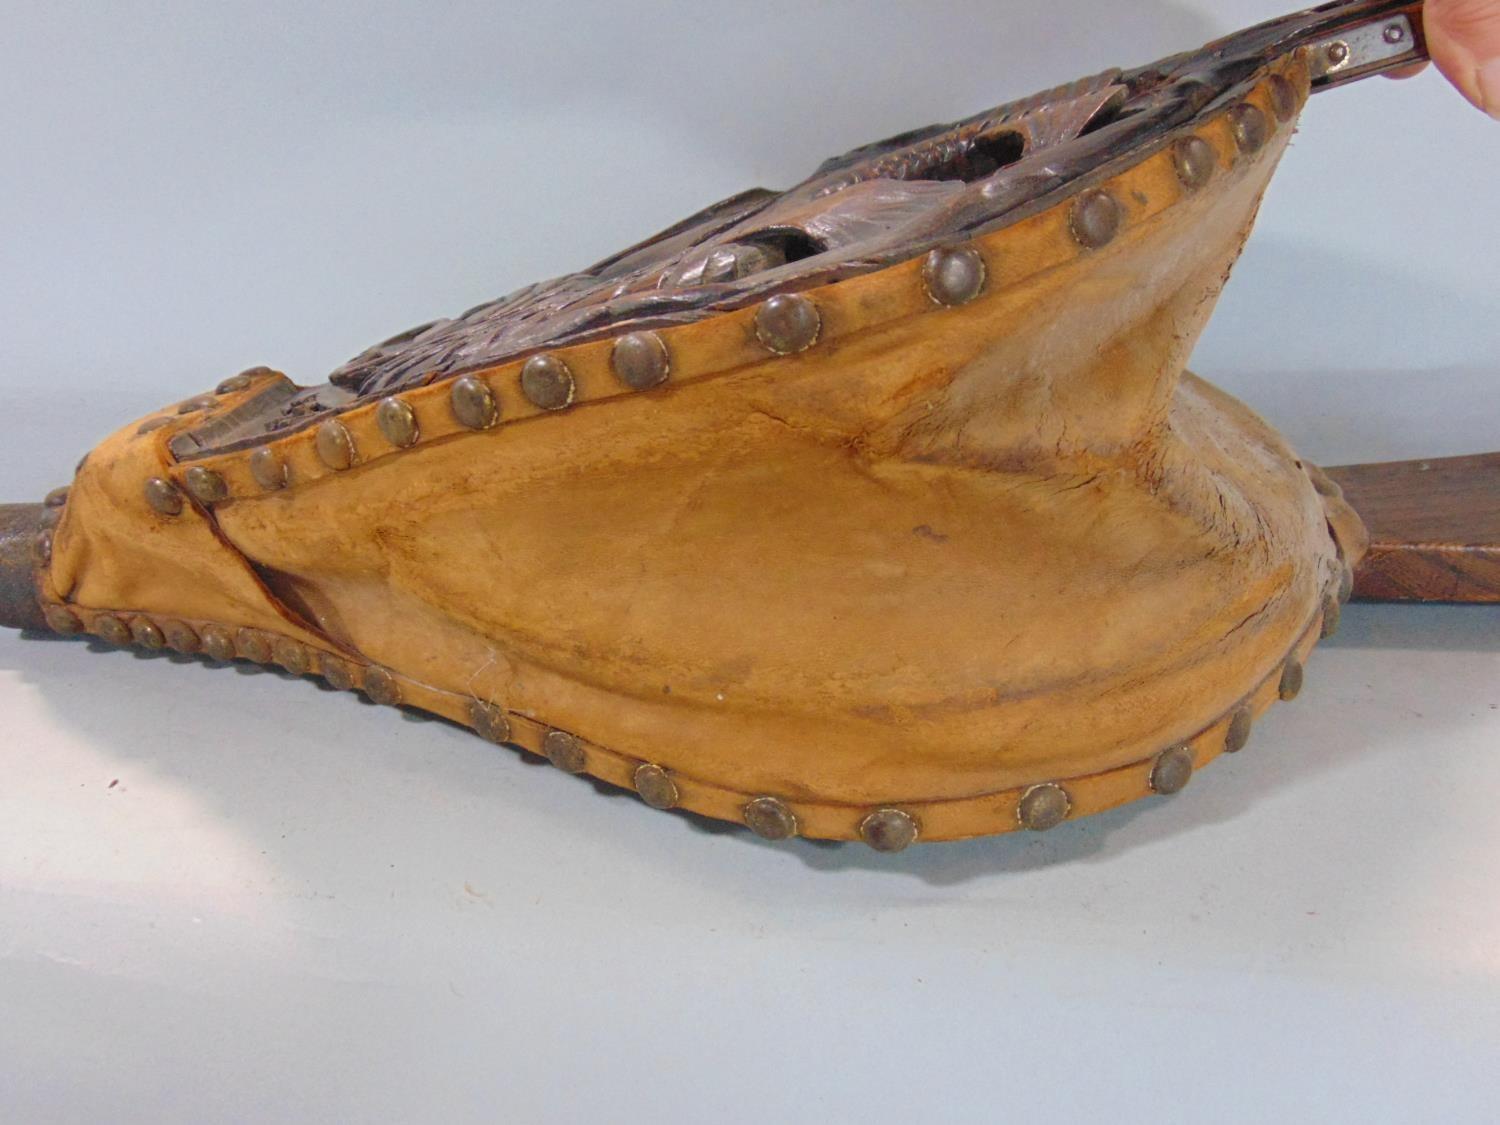 Pair of antique oak fire bellows carved with a coiled fish amidst reeds, with studded leather - Image 3 of 3